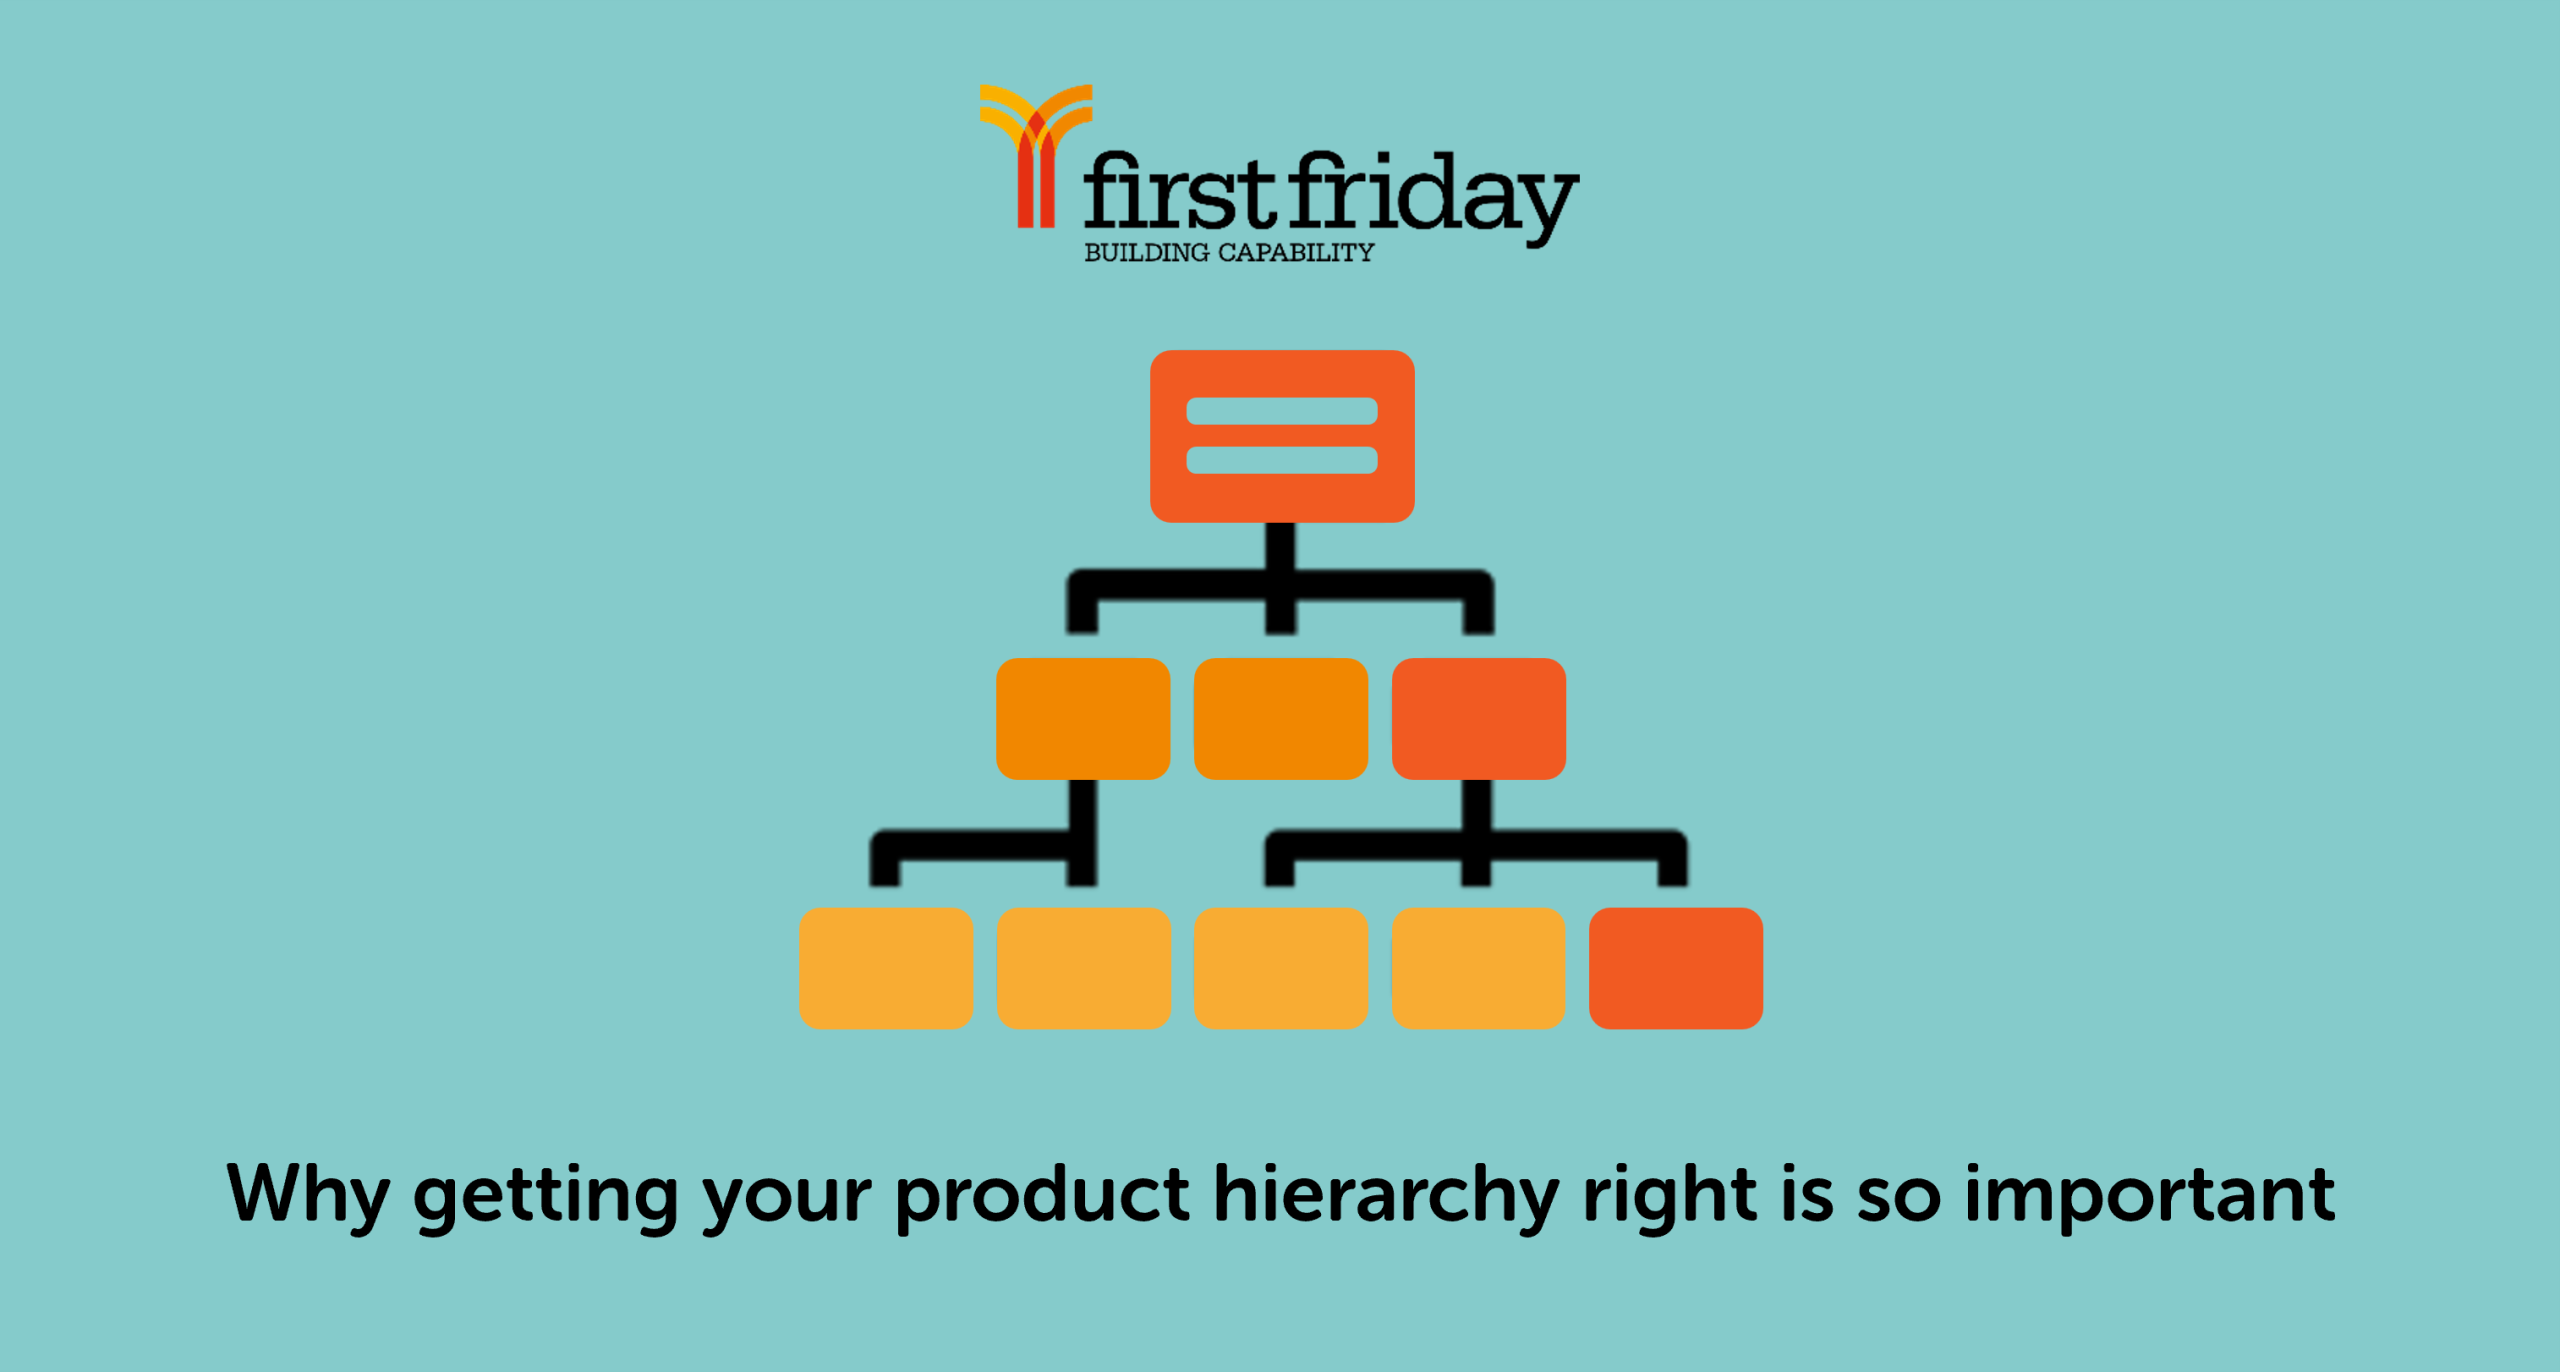 Successful merchandising relies on good hierarchy